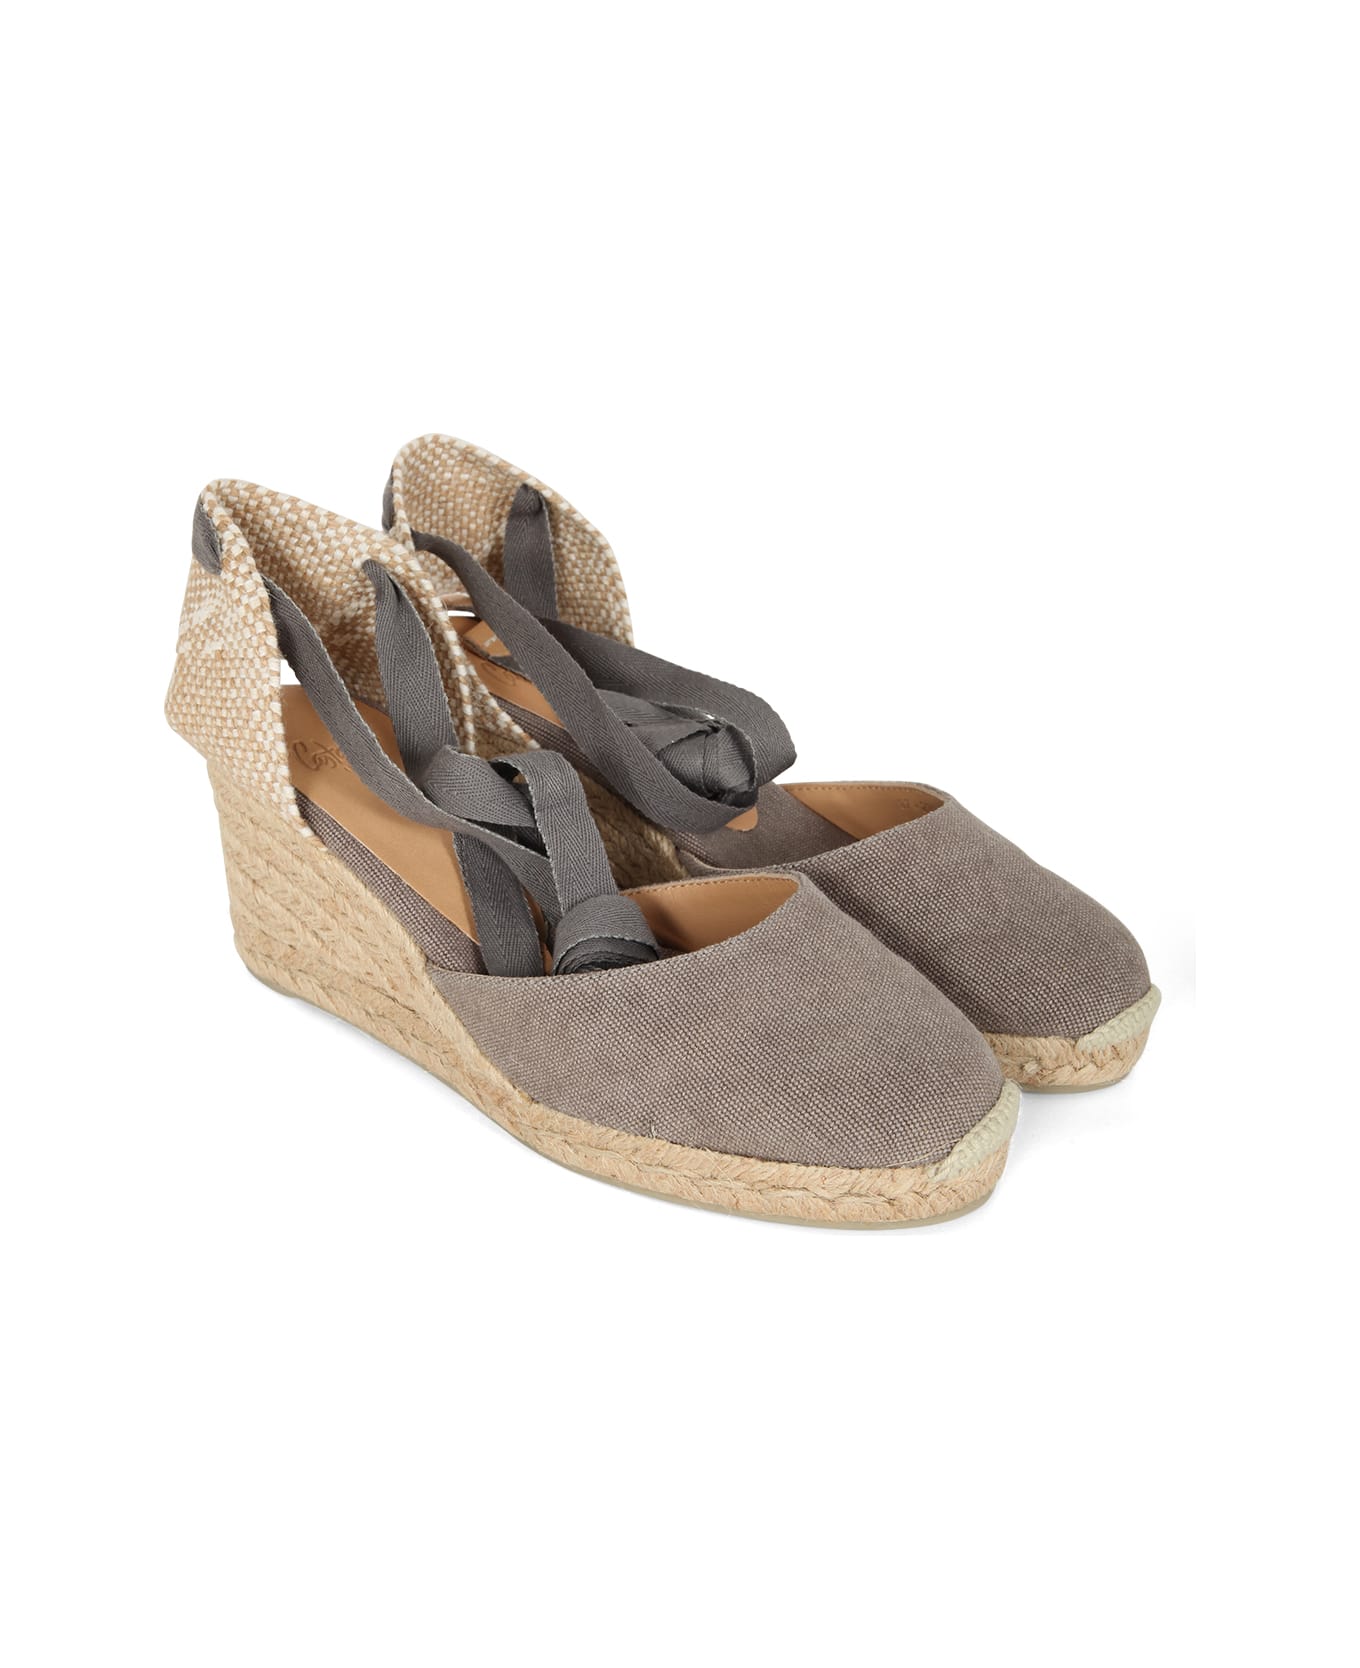 Castañer Carina Espadrilles Wedge Sandal With Ankle Laces - Lead Grey